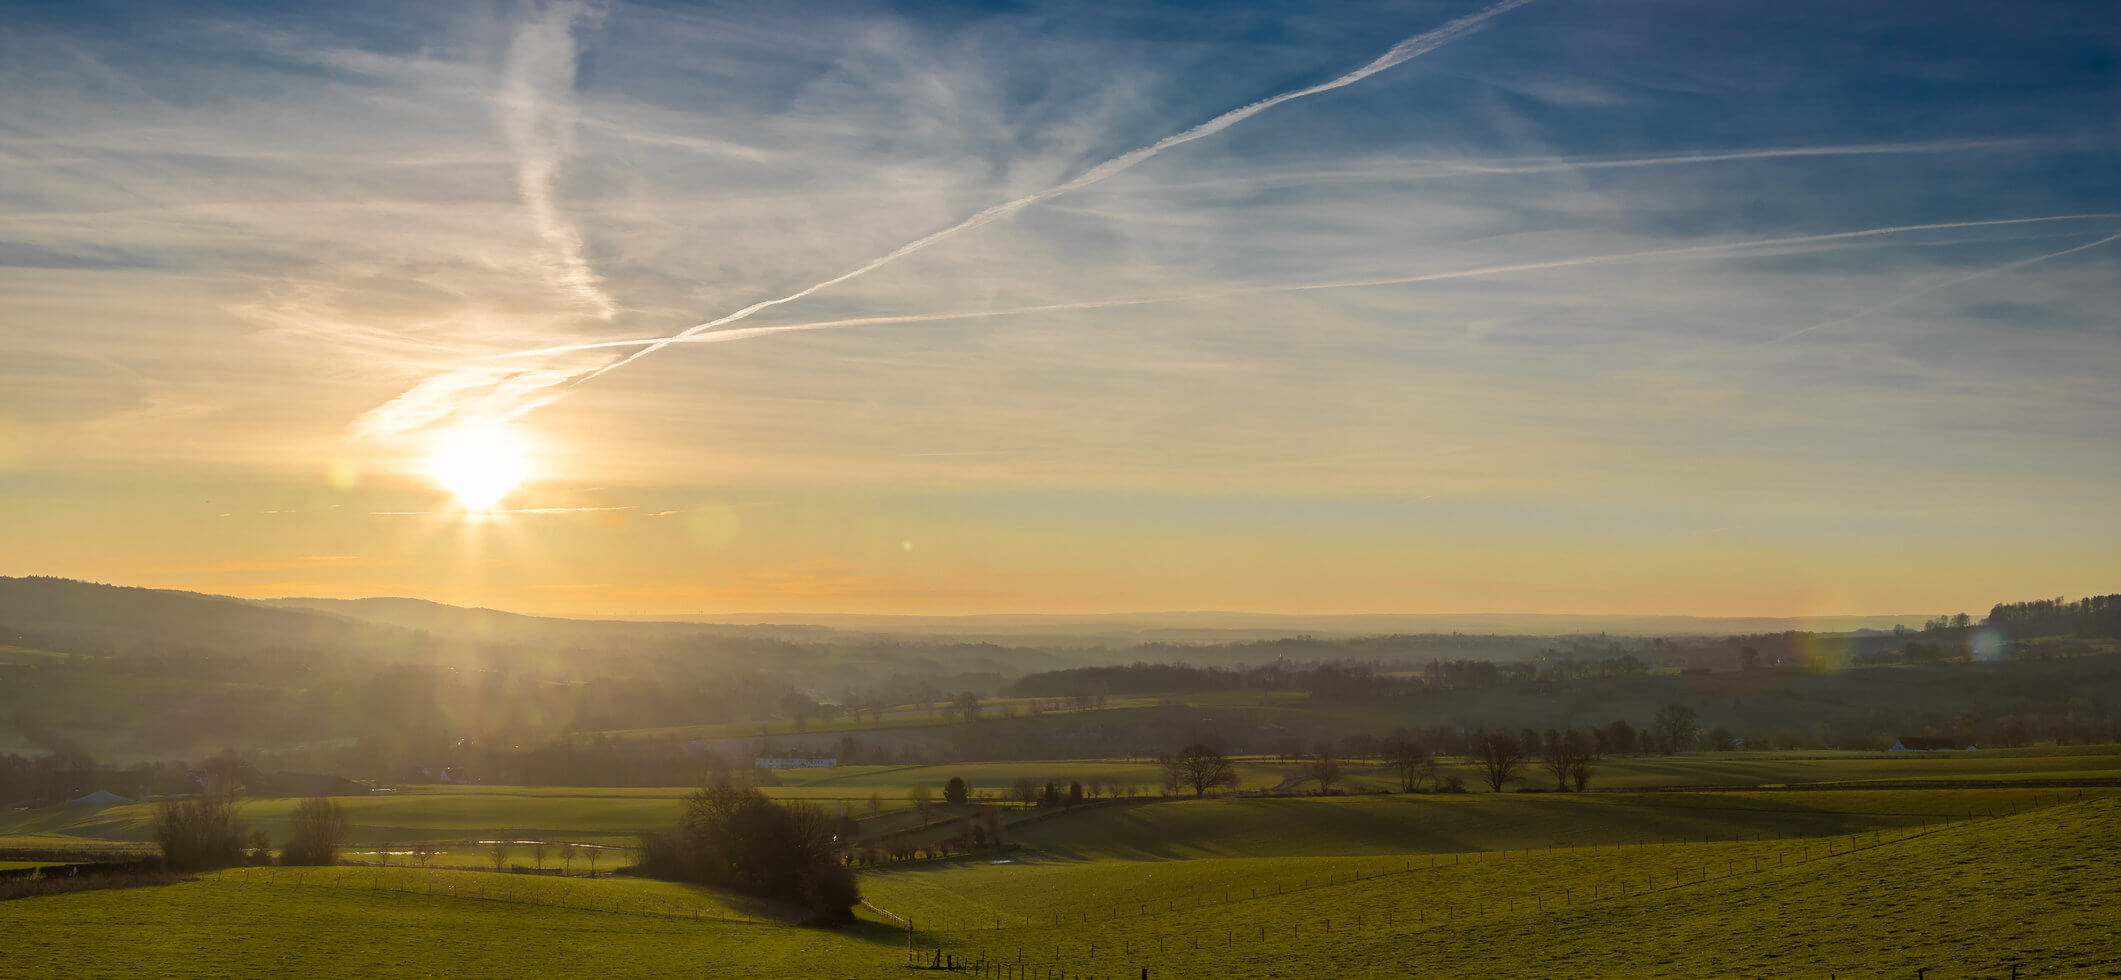 A cold sunrise over the rolling hills in the south of the Netherlands, giving a winter feeling with the first beams of the sun over the green meadows and hills